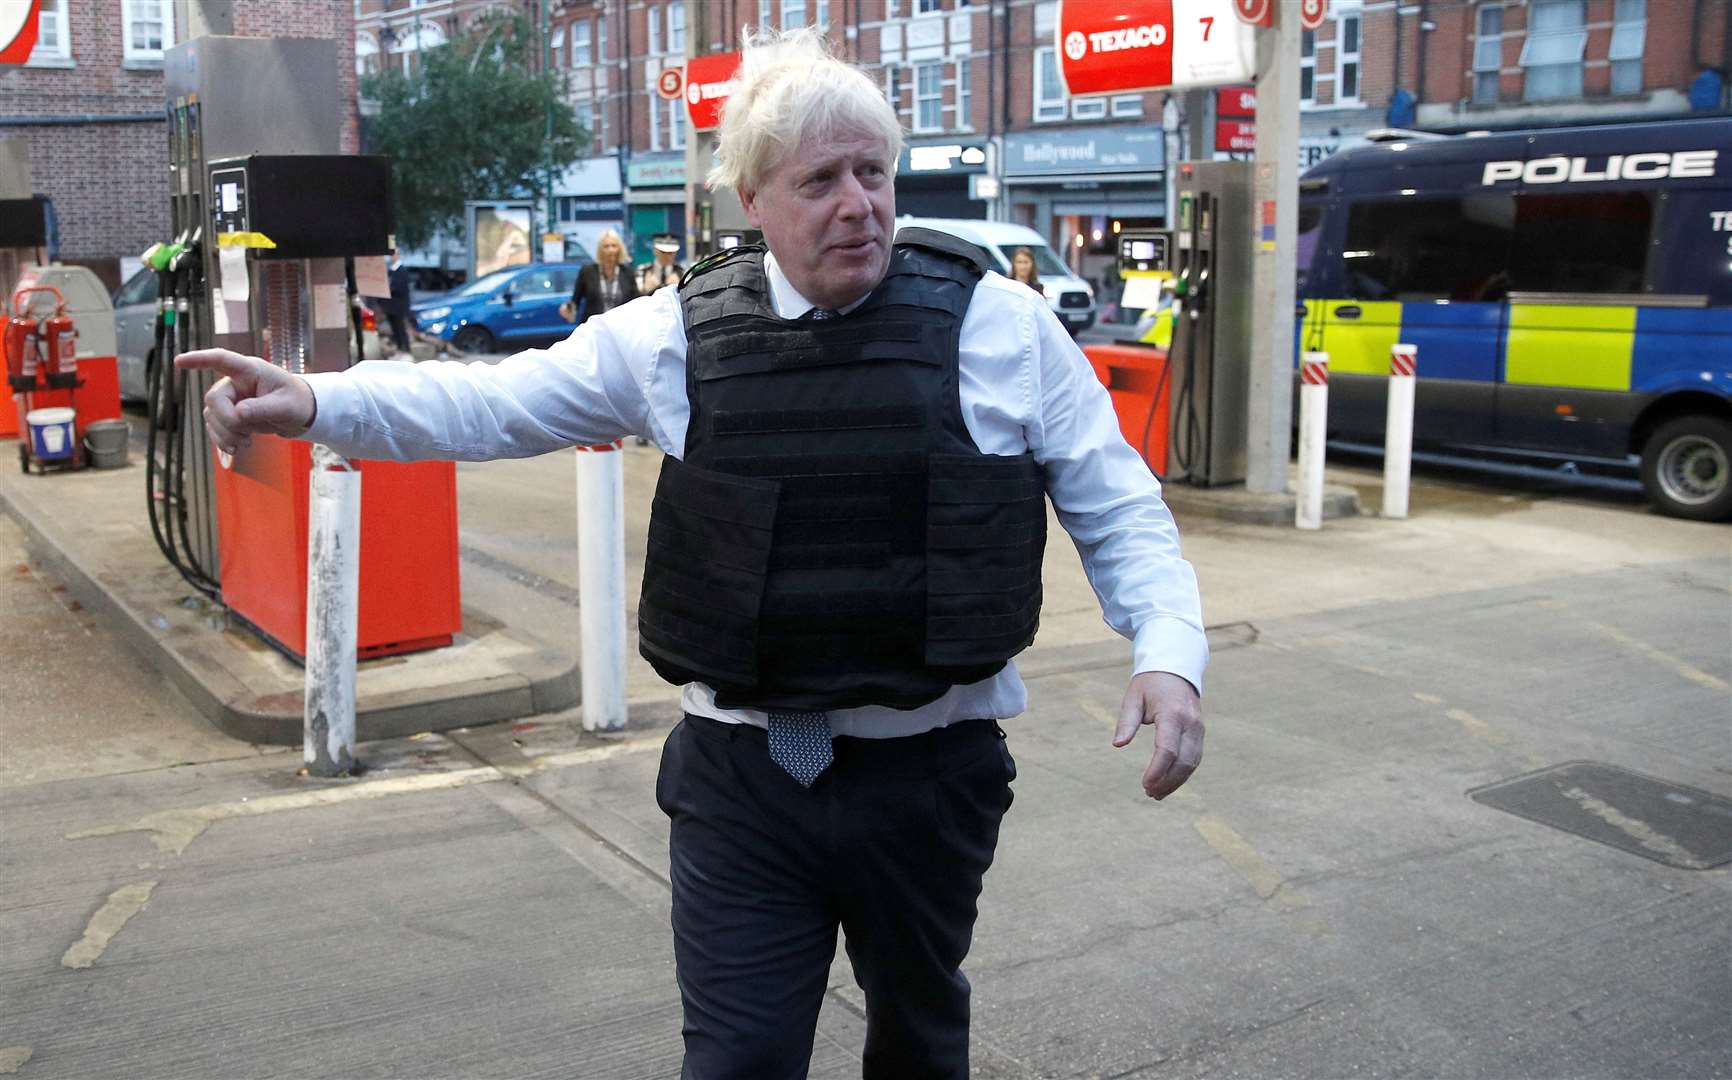 Mr Johnson leaves the area after viewing a drugs related raid by Metropolitan Police officers in West Norwood, London (Peter Nicholls/PA)